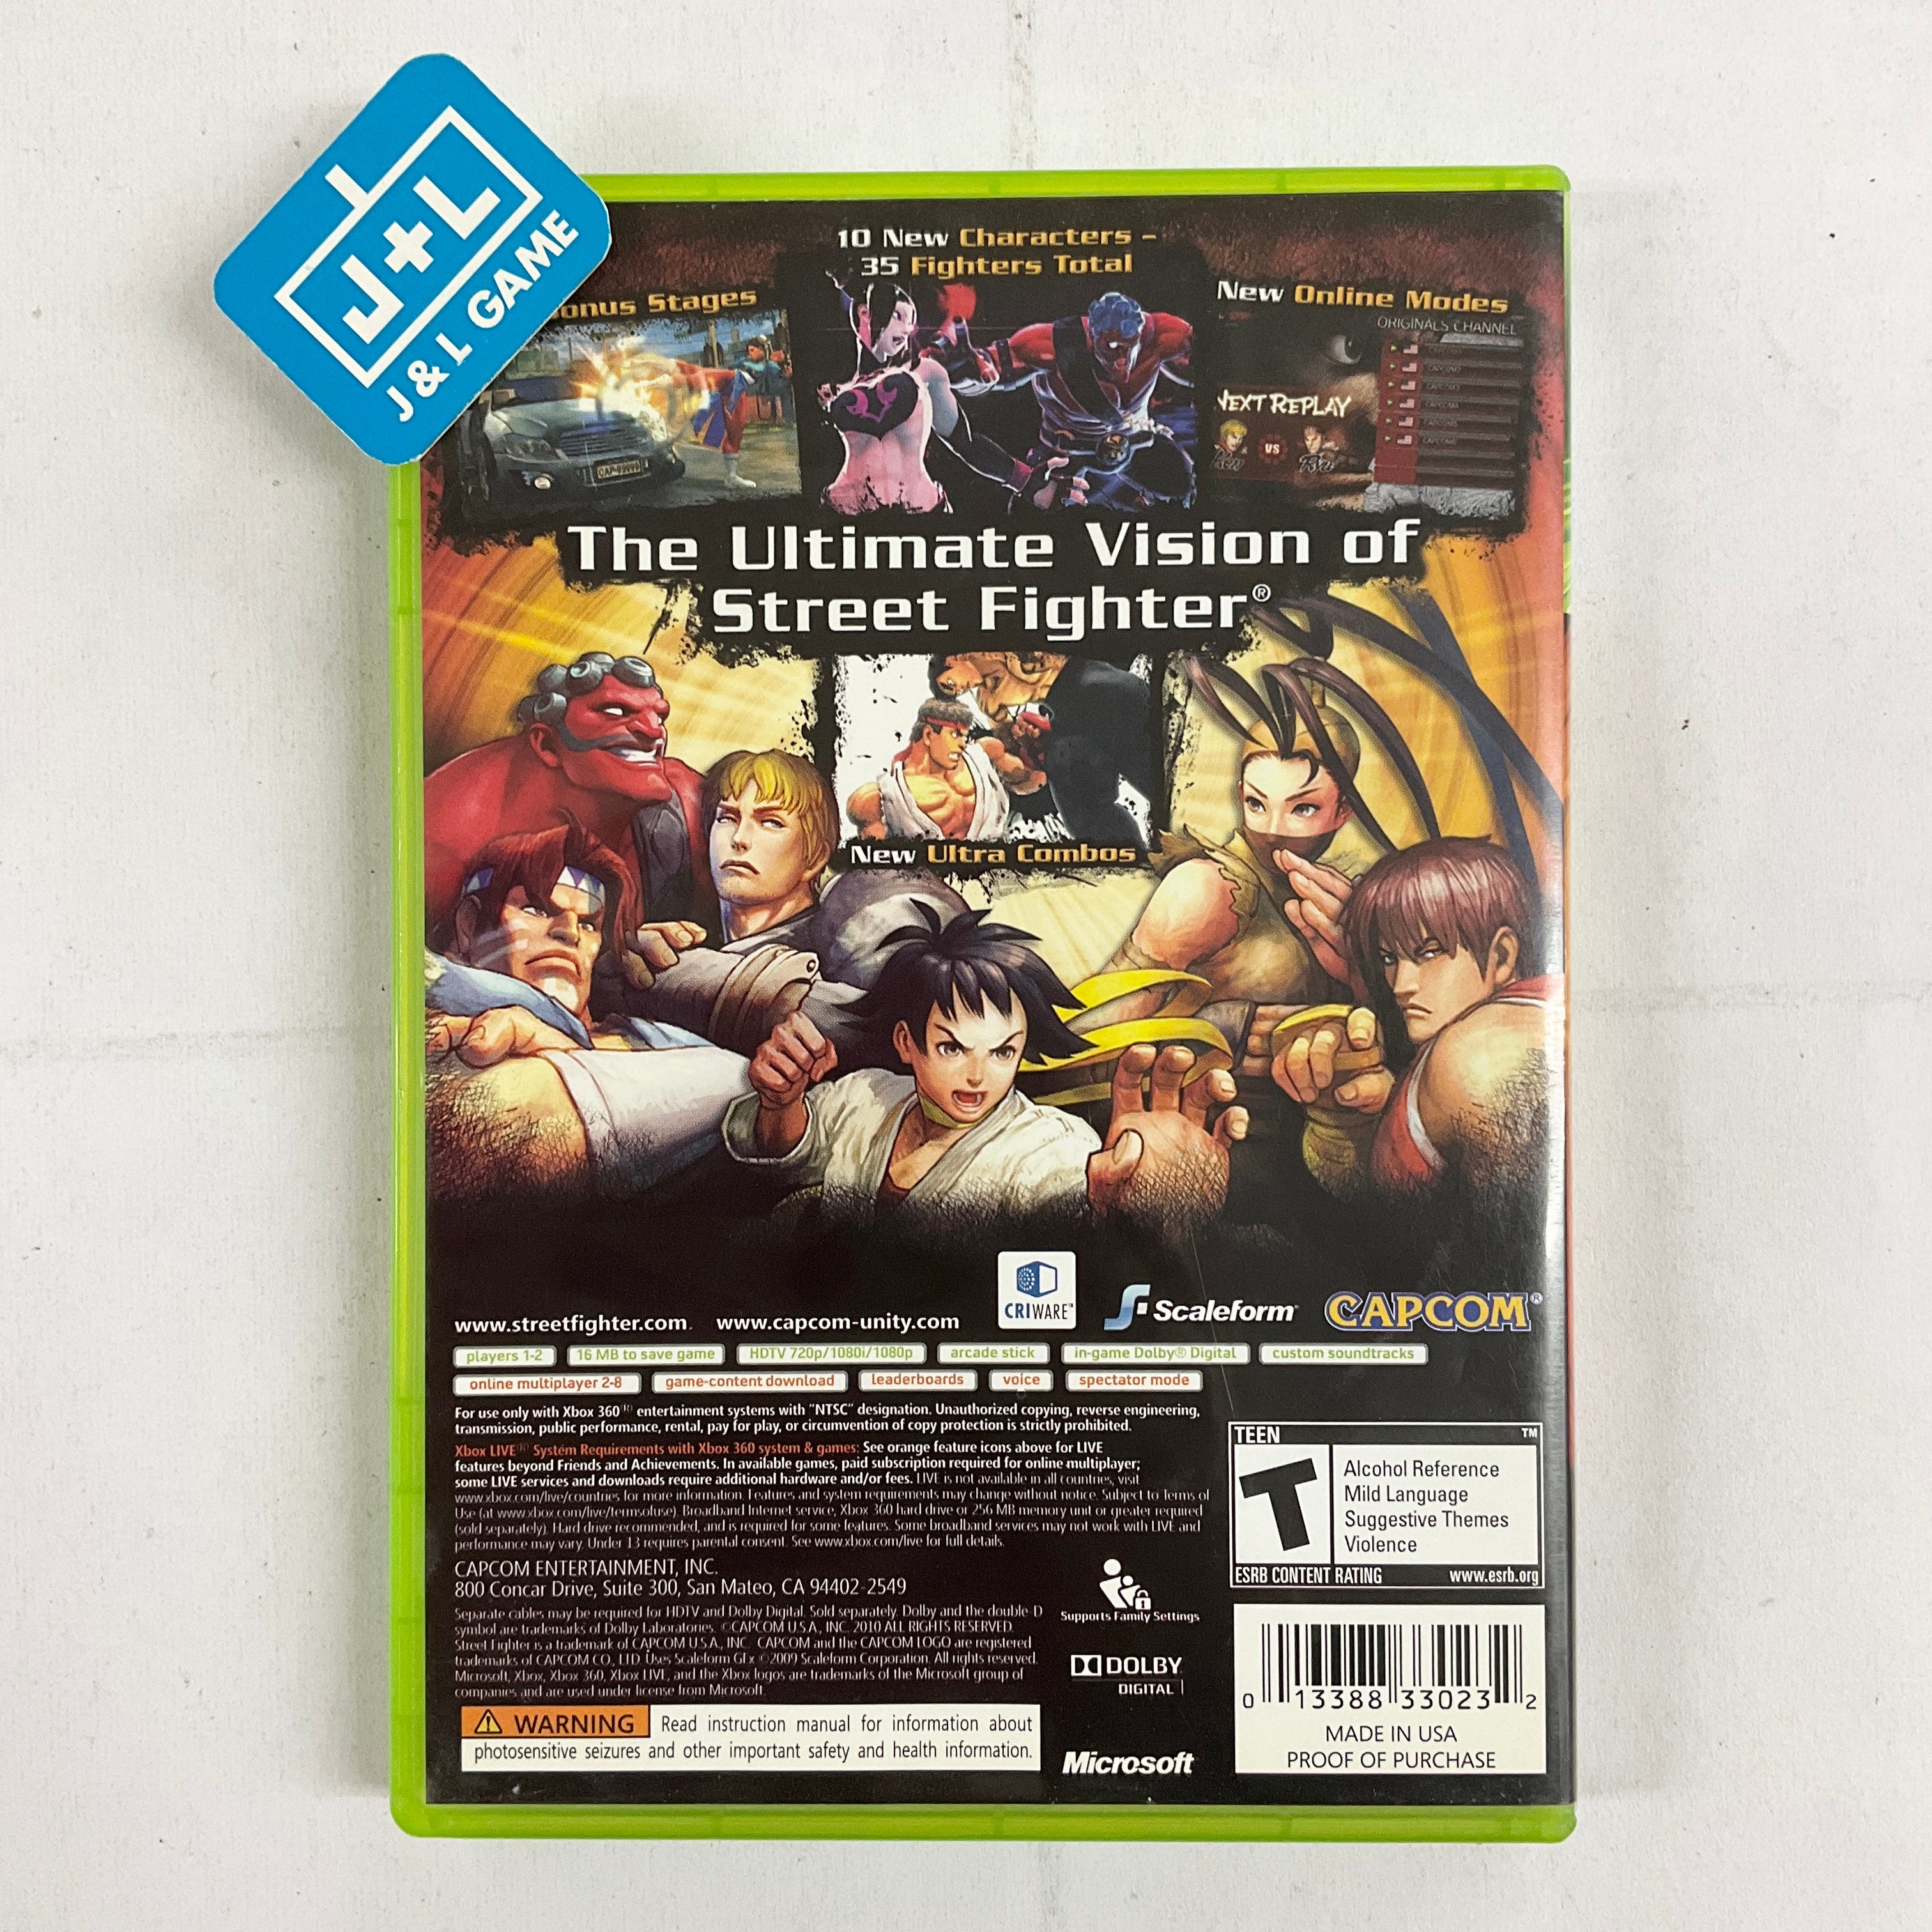 Super Street Fighter IV - Xbox 360 [Pre-Owned] Video Games Capcom   